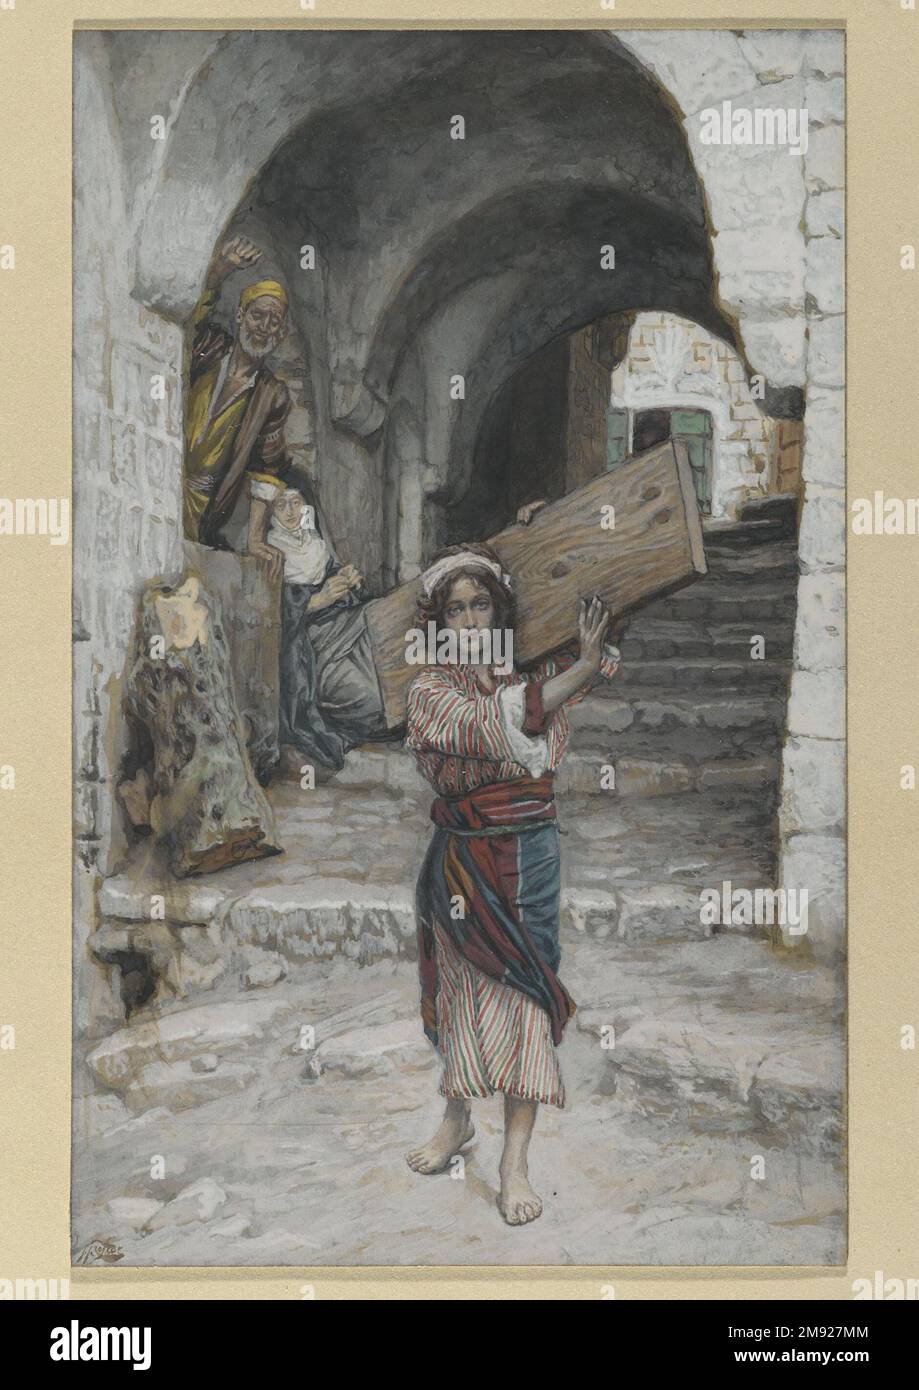 The Youth of Jesus (Jeunesse de Jésus) James Tissot (French, 1836-1902). The Youth of Jesus (Jeunesse de Jésus), 1886-1894. Opaque watercolor over graphite on gray wove paper, Image: 8 13/16 x 5 9/16 in. (22.4 x 14.1 cm).  Although the Gospels are silent on the years between Christ’s childhood and his ministry—providing no specific indication of his training or education—Tissot adheres to tradition and depicts Jesus as a faithful son to his earthly father, assisting Joseph with the work of the carpentry shop. In his commentary, Tissot spurned apocryphal legends of wondrous doings by the Christ Stock Photo